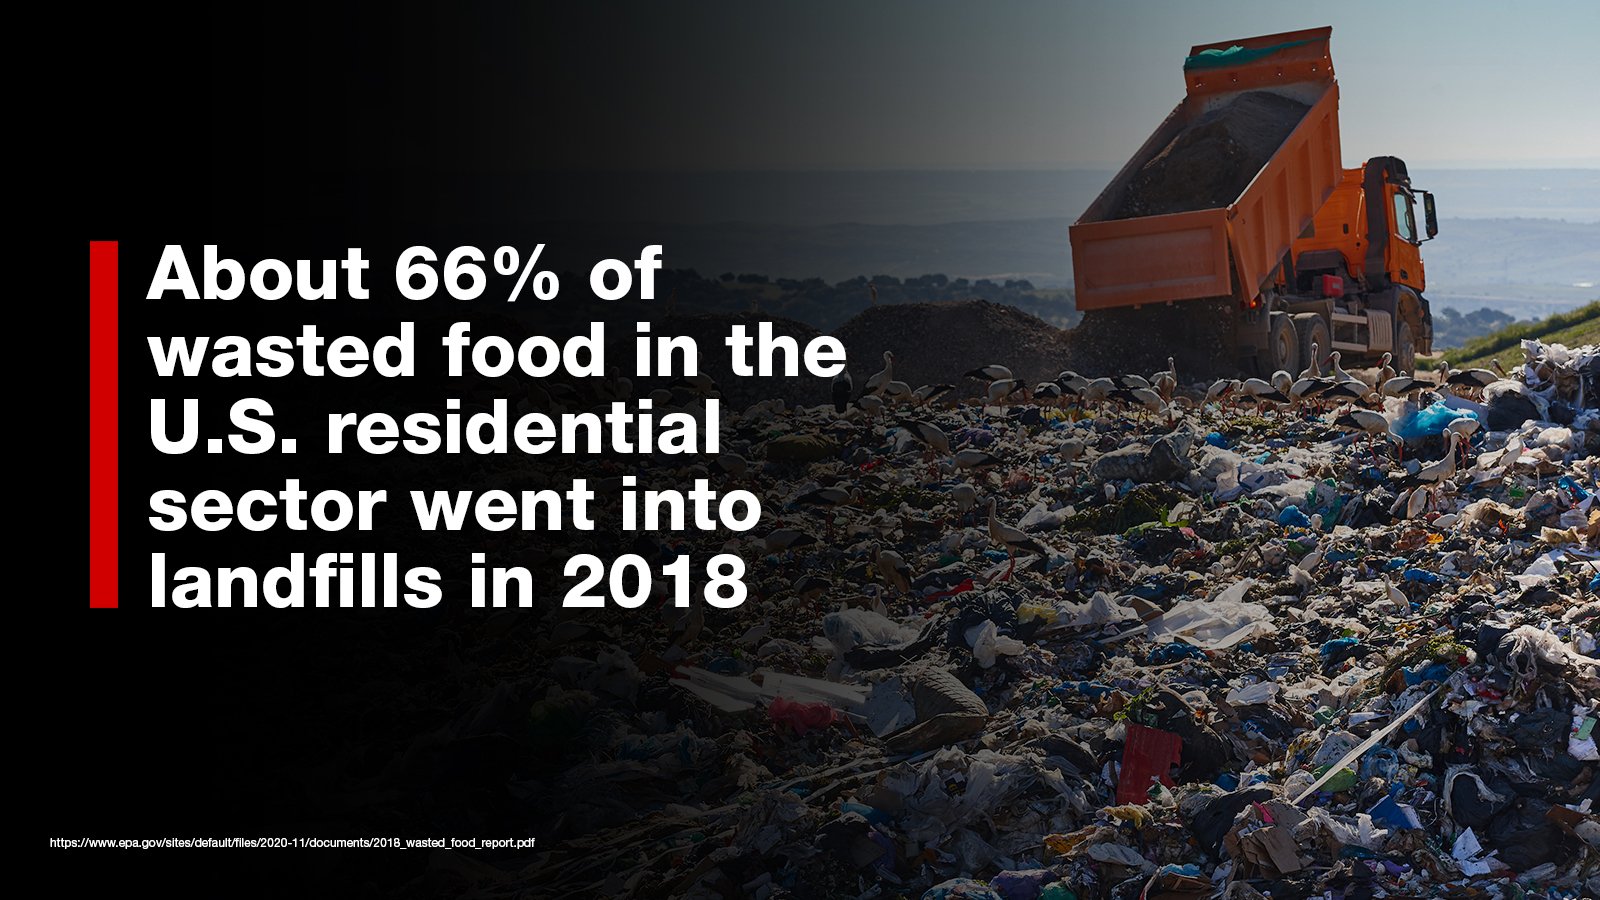 About 66% of wasted residential food went into landfills in 2018